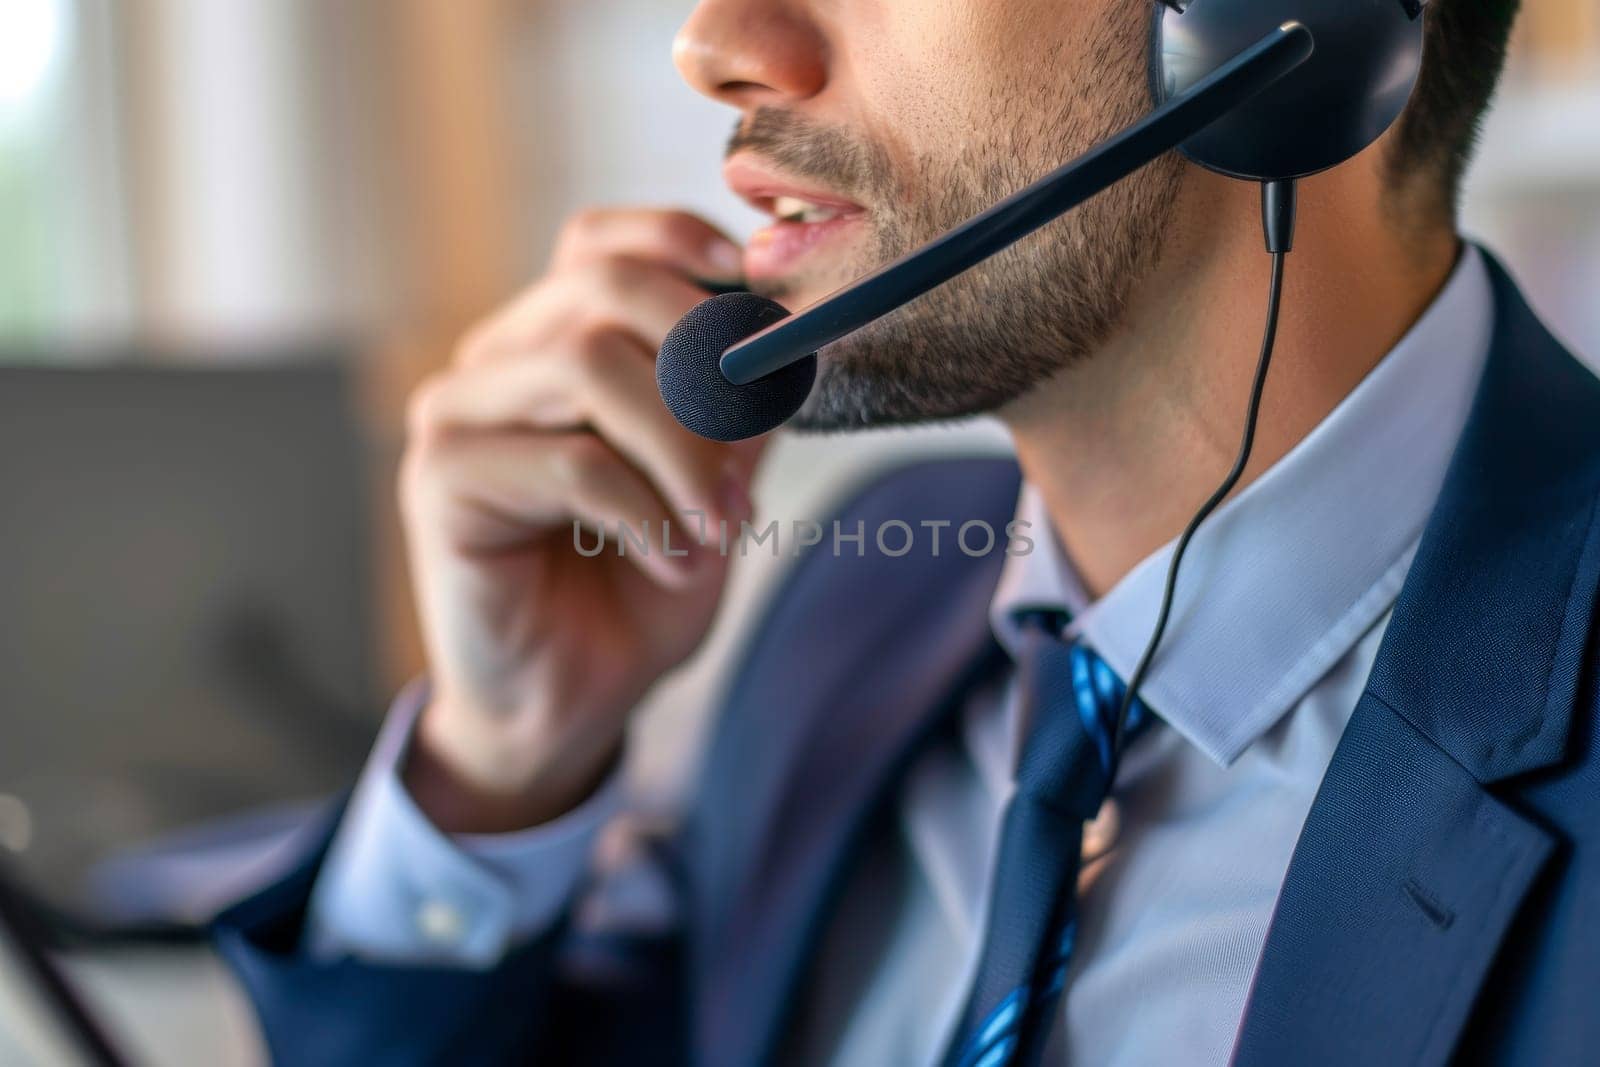 consultant with headphones for customer service and support helping customer, call center.